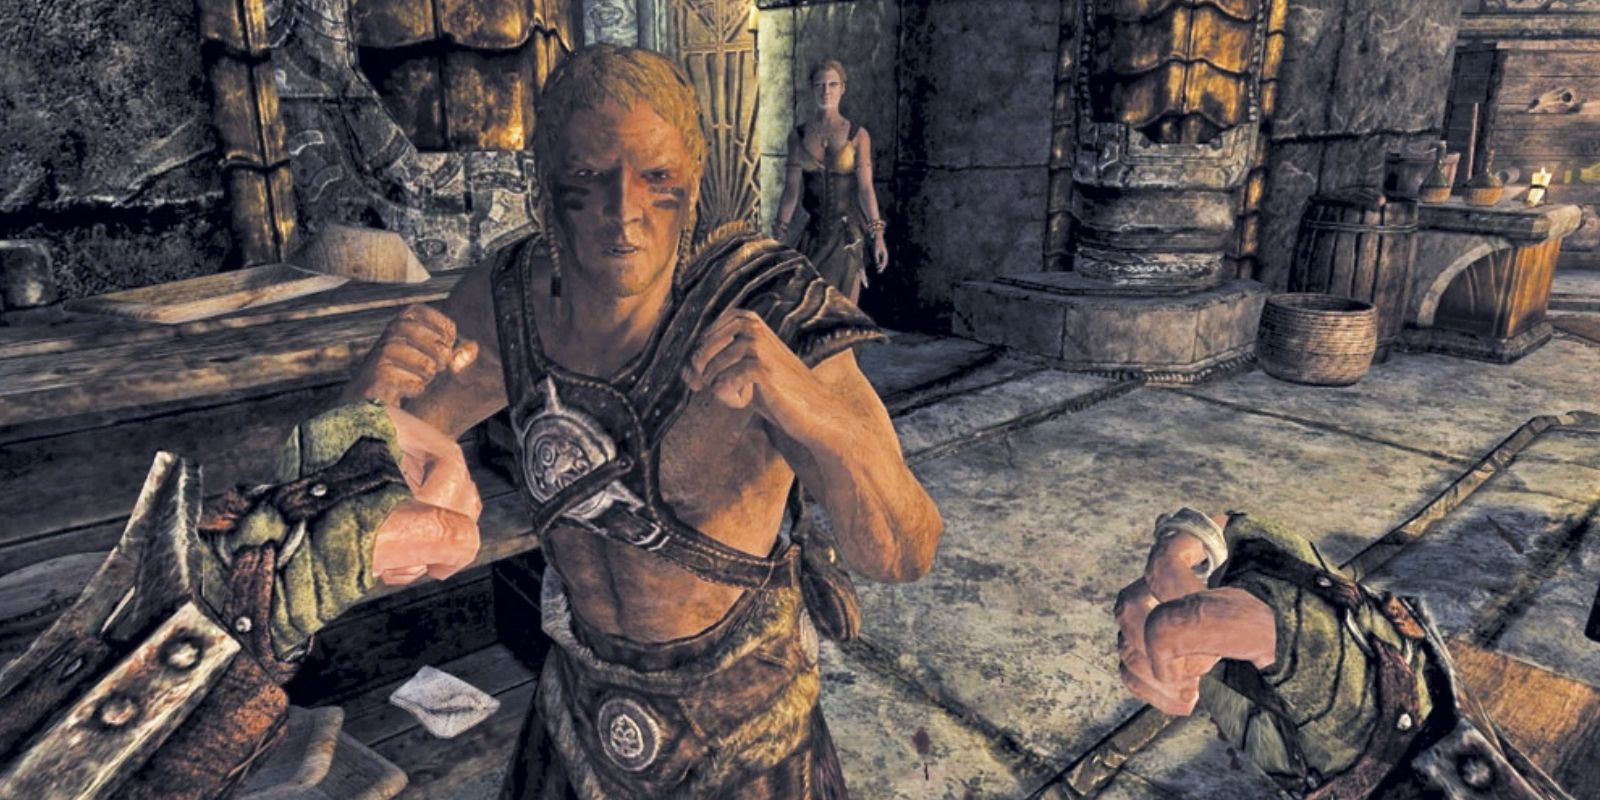 First person view of raised fists towards skyrim characters whose fists are also raised in direction of player with a stone room in background  and various crates and barrels